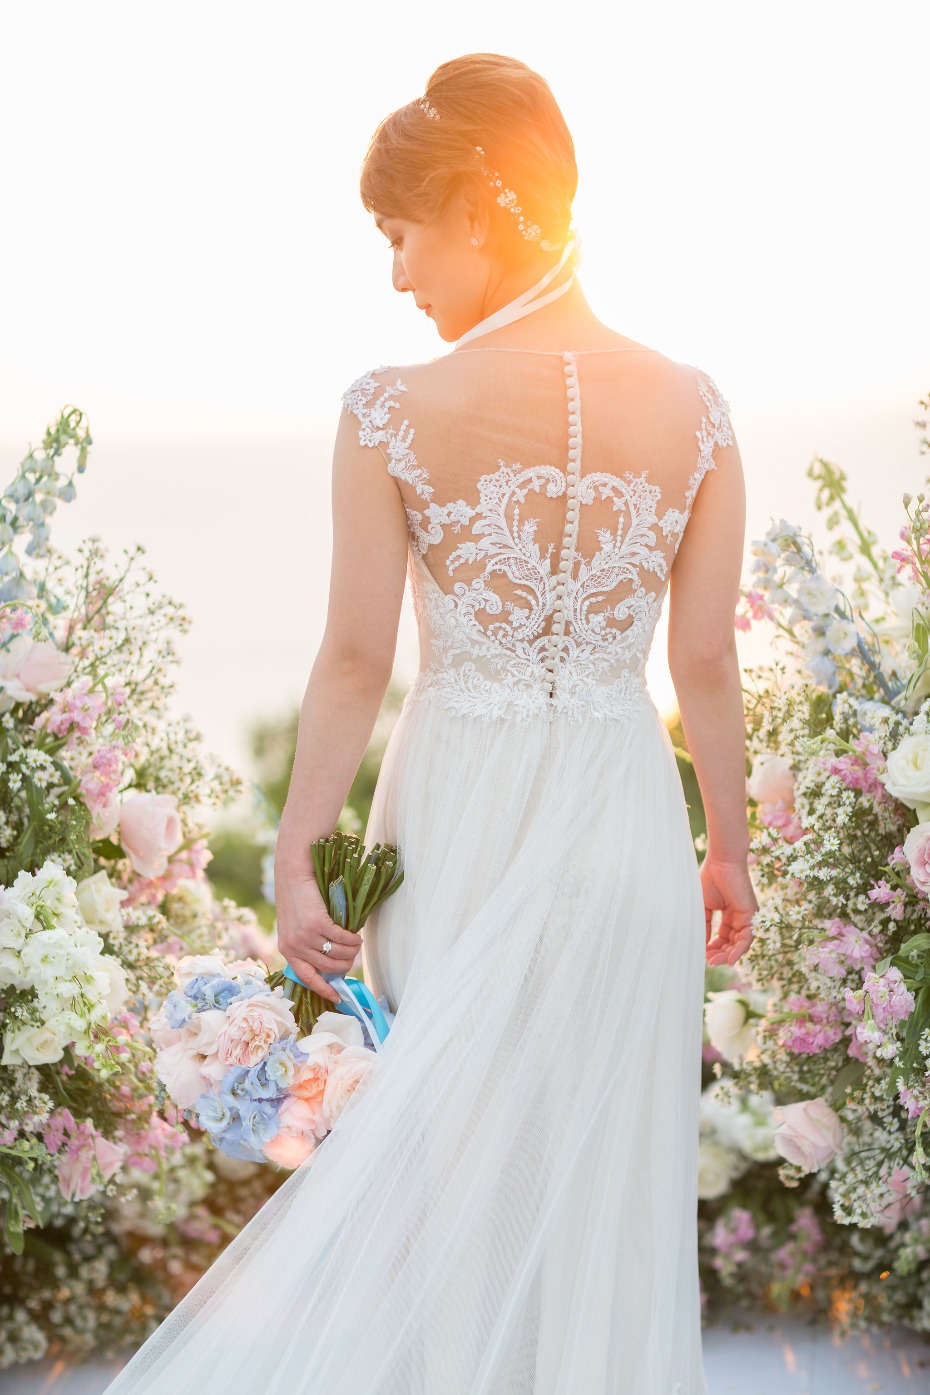 Elegant lace back wedding gown by Lusan Mandongus